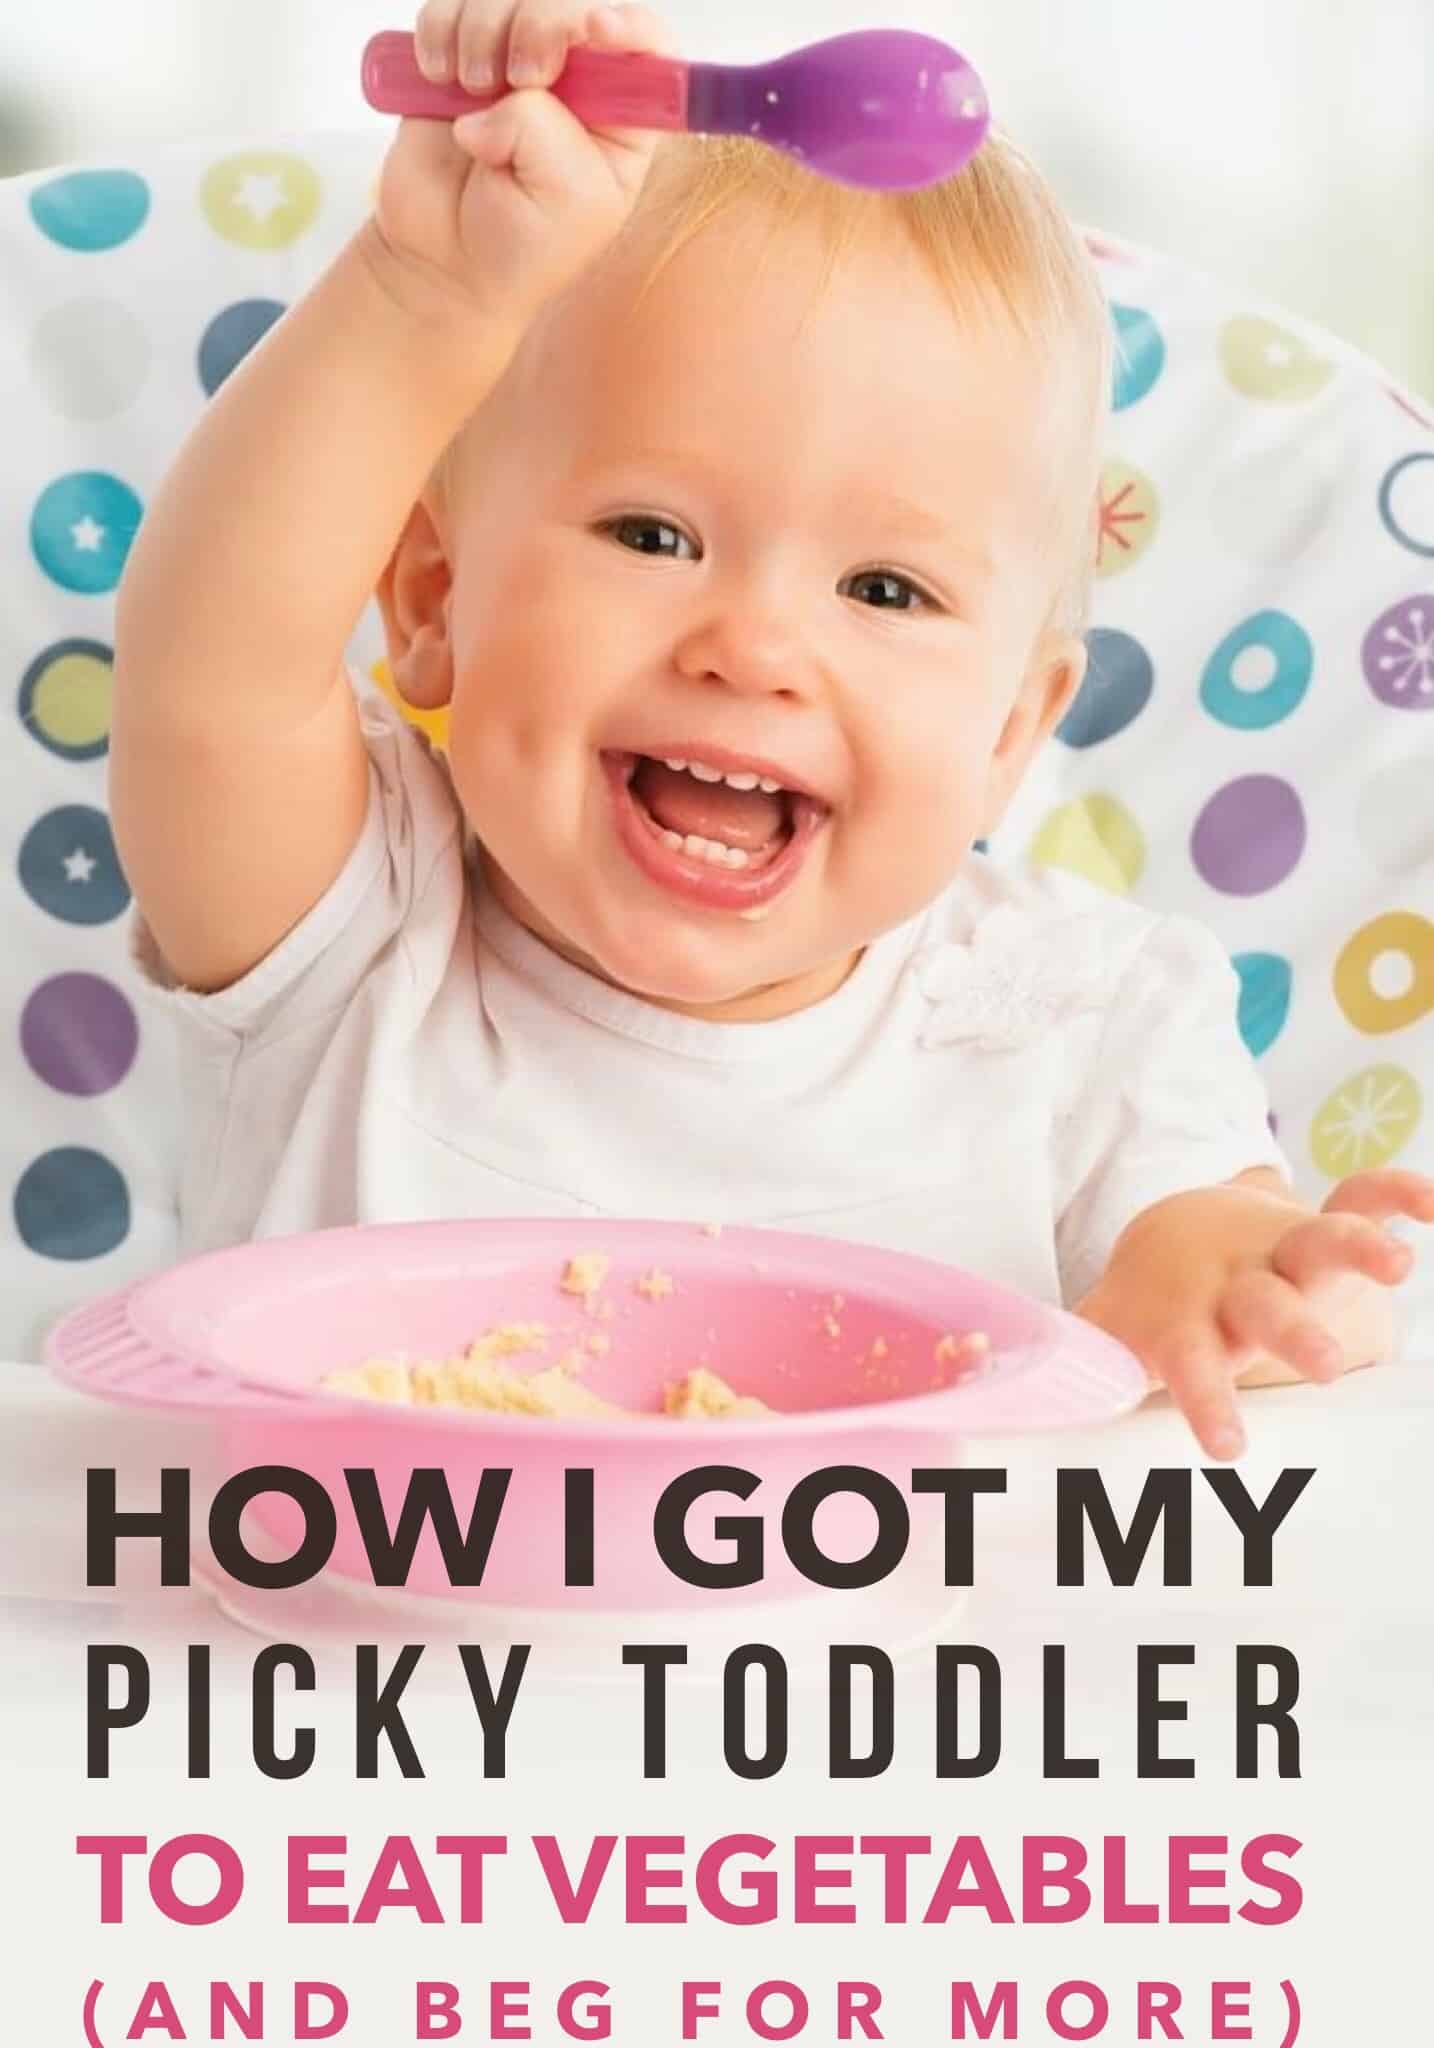 Here are some tips that helps with picky eaters....